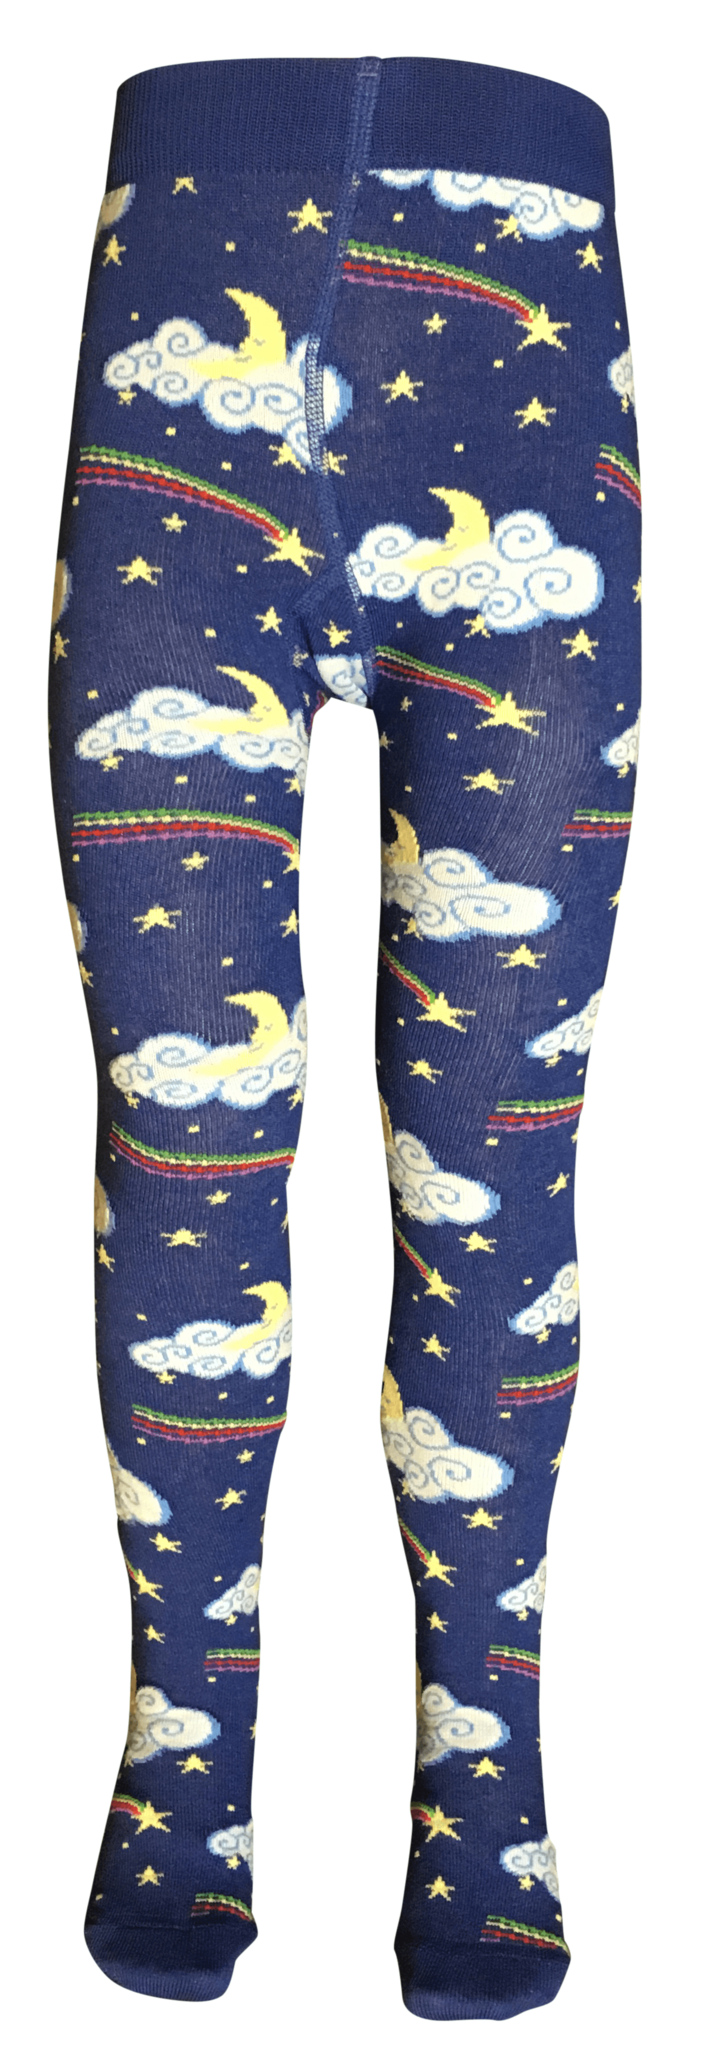 Slugs and Snails - Tights Lemon Lightning Clouds, Stars and Rainbows - Maillot Vallende Ster